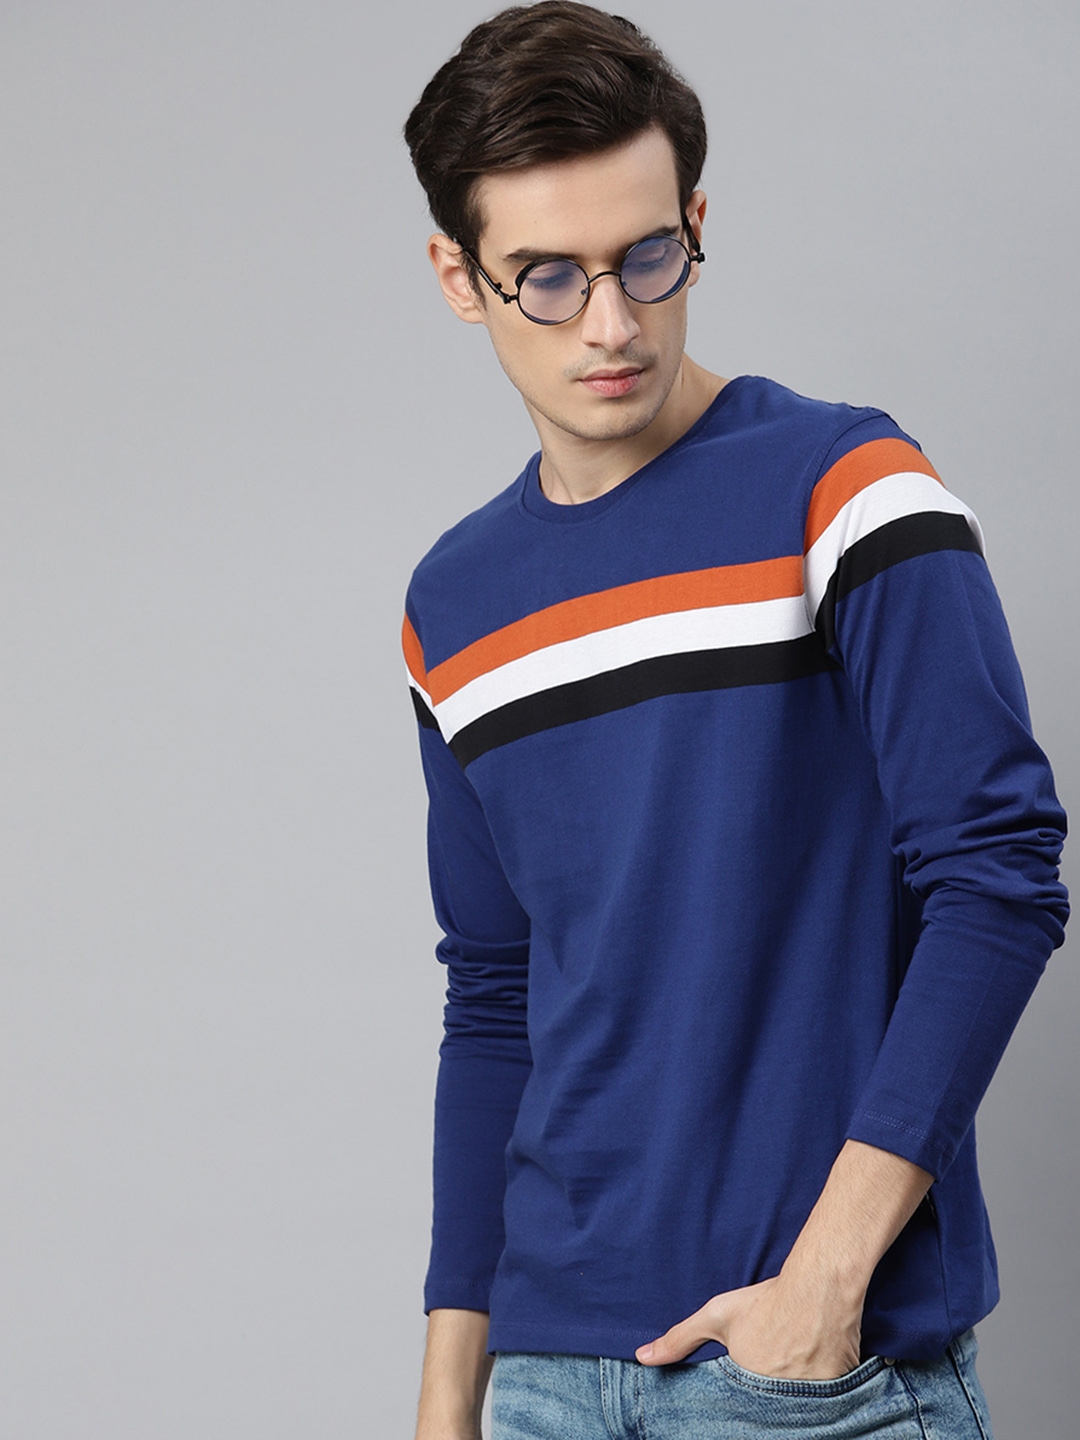 Buy The Roadster Lifestyle Co Men Blue Cotton Striped Detail Round Neck ...